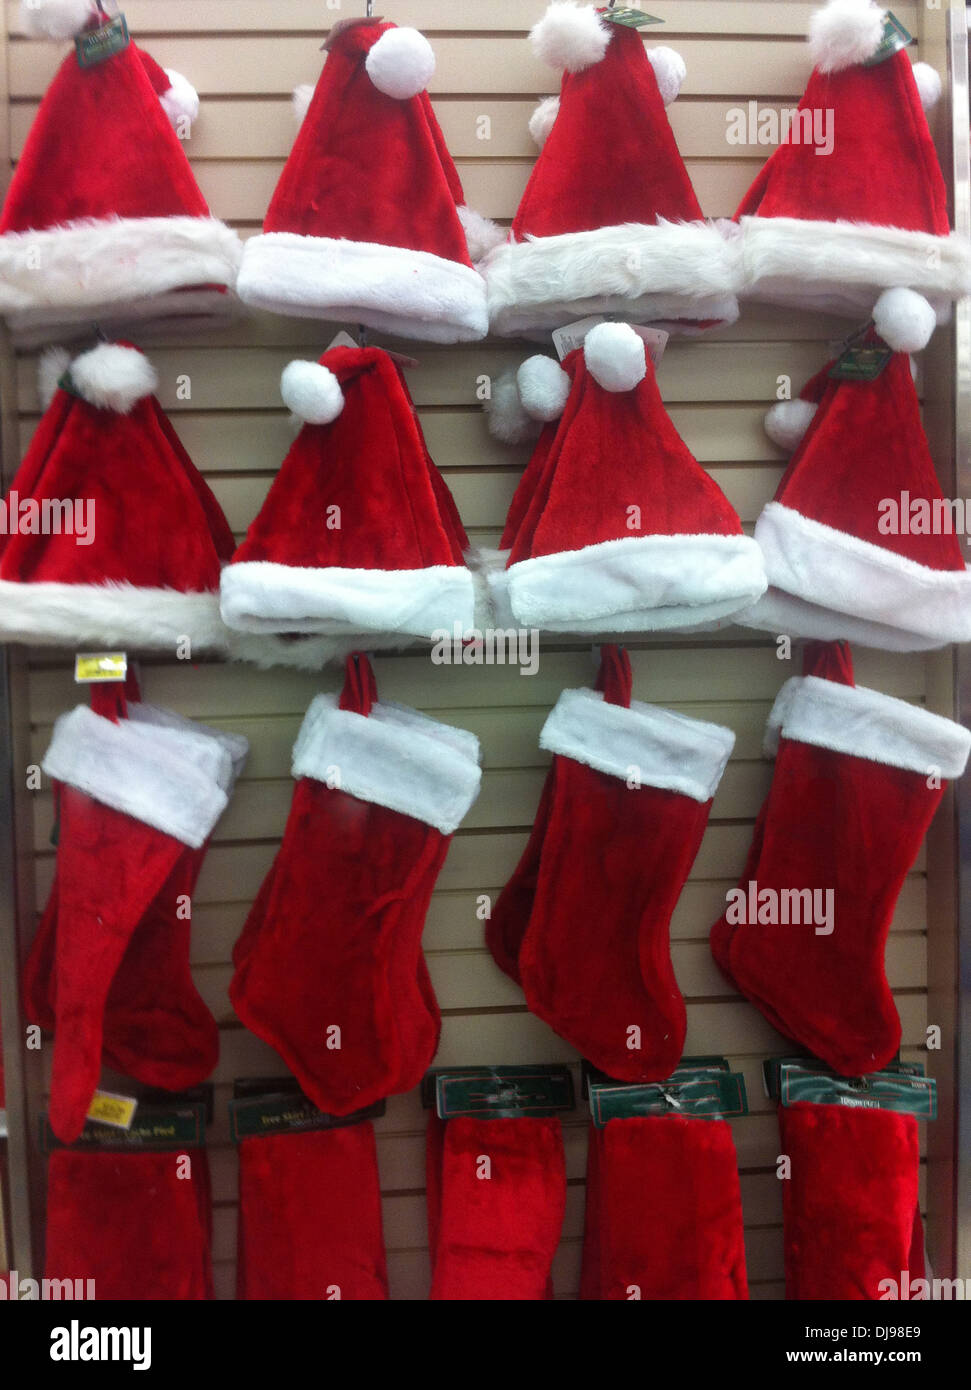 Santa Hats And Christmas Stockings For Sale Stock Photo Alamy,Decorating With Antiques Book